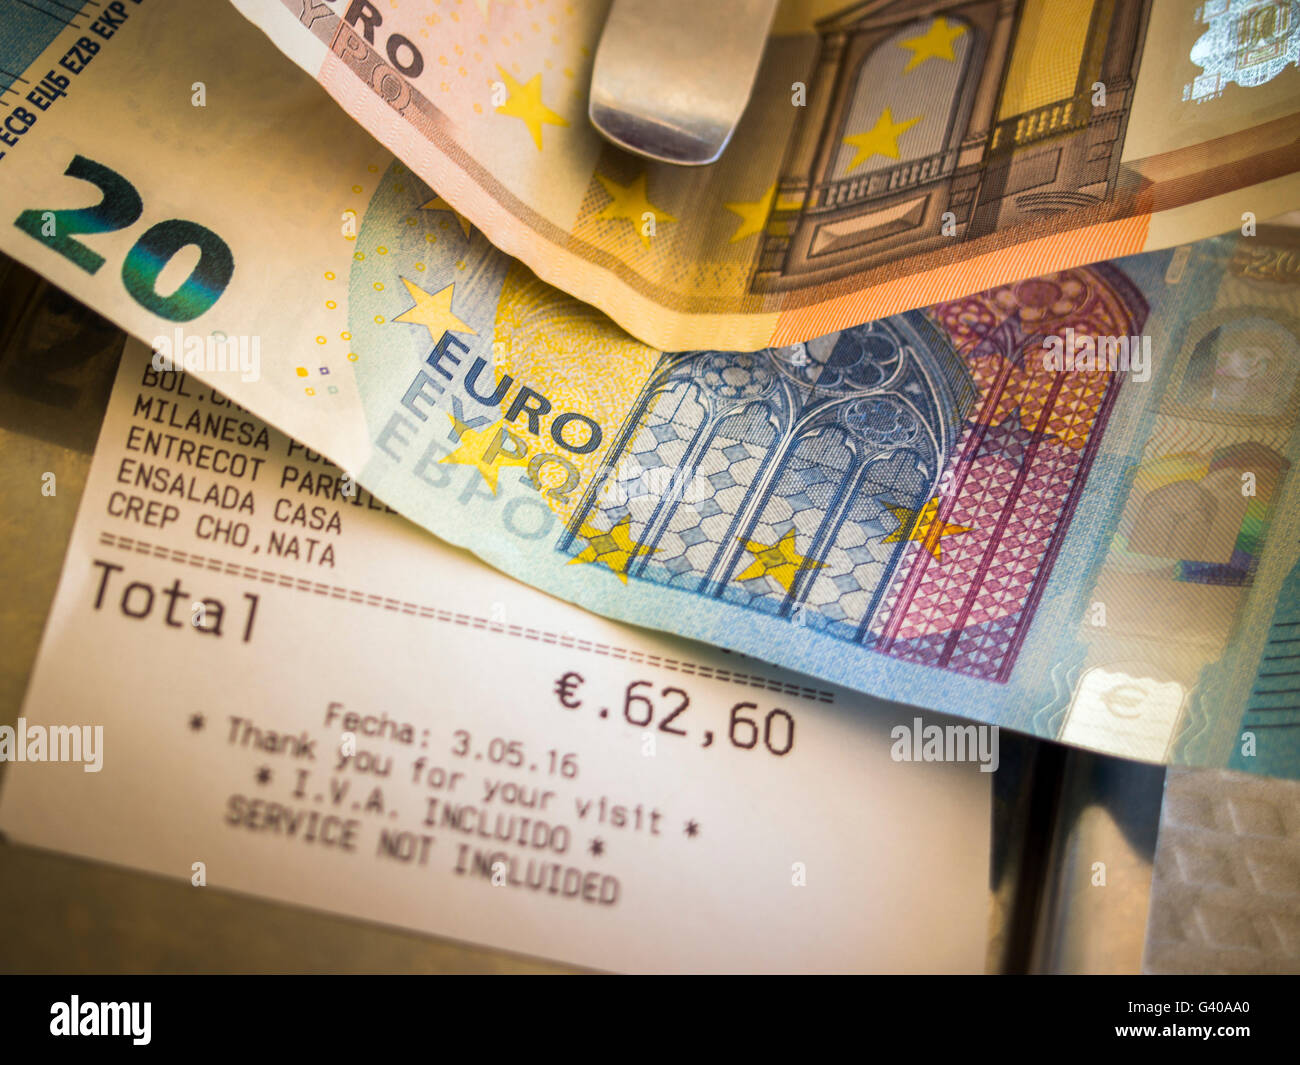 Restaurant bill with euro coins Stock Photo